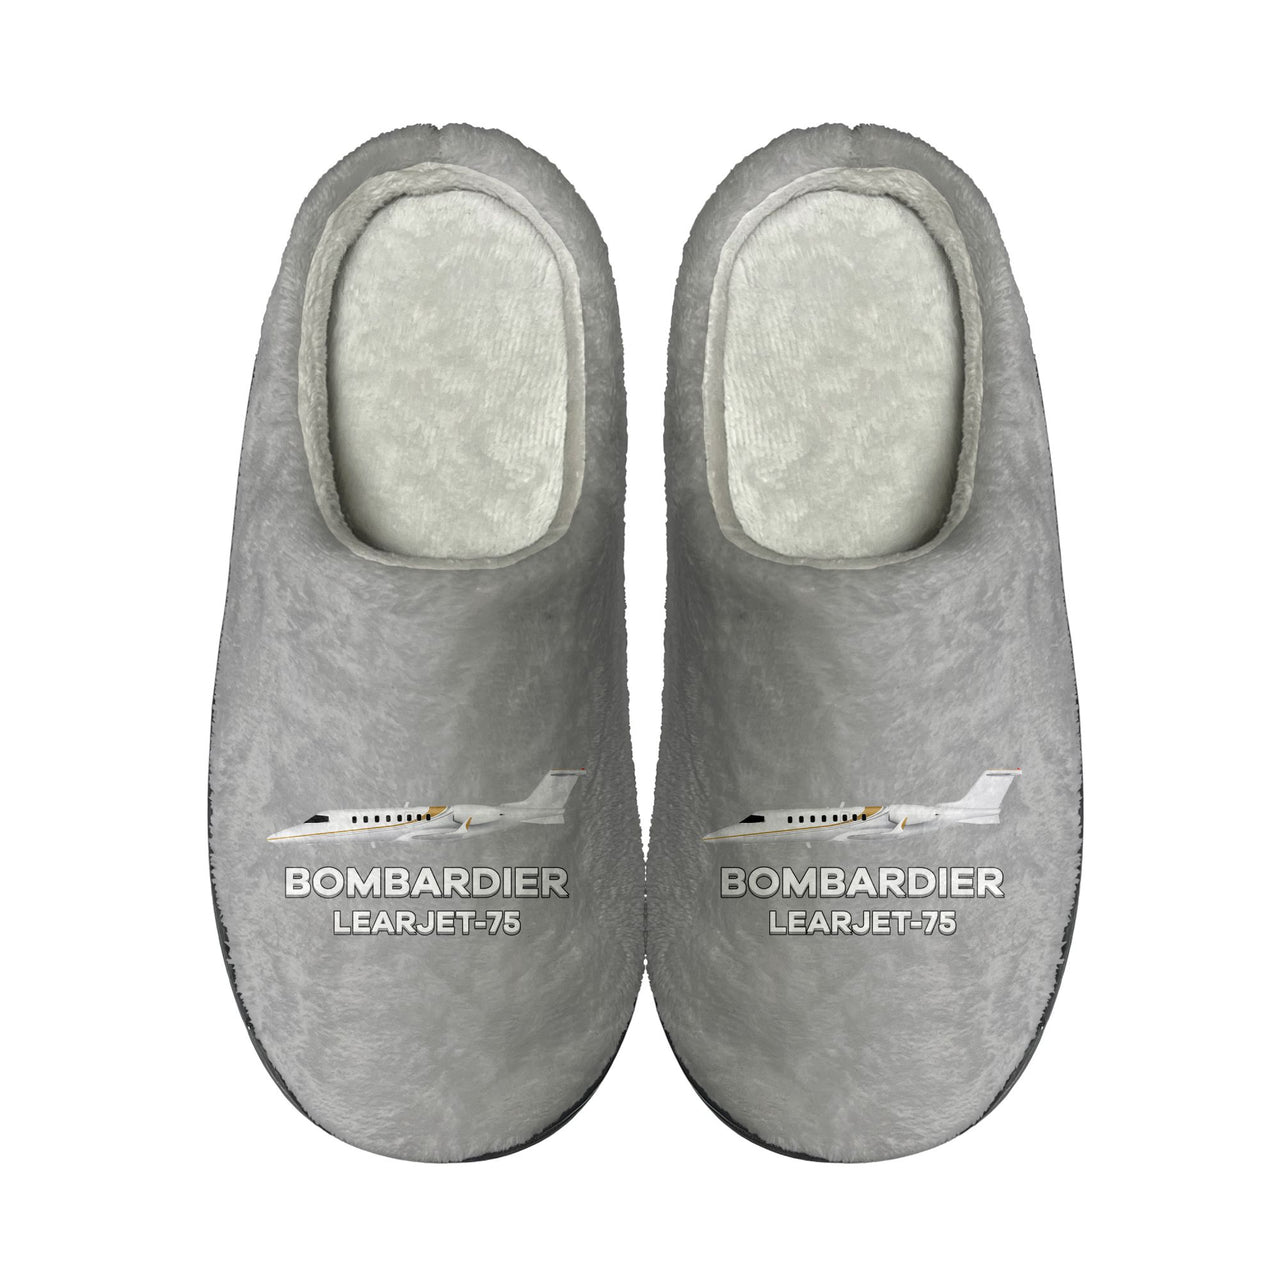 The Bombardier Learjet 75 Designed Cotton Slippers